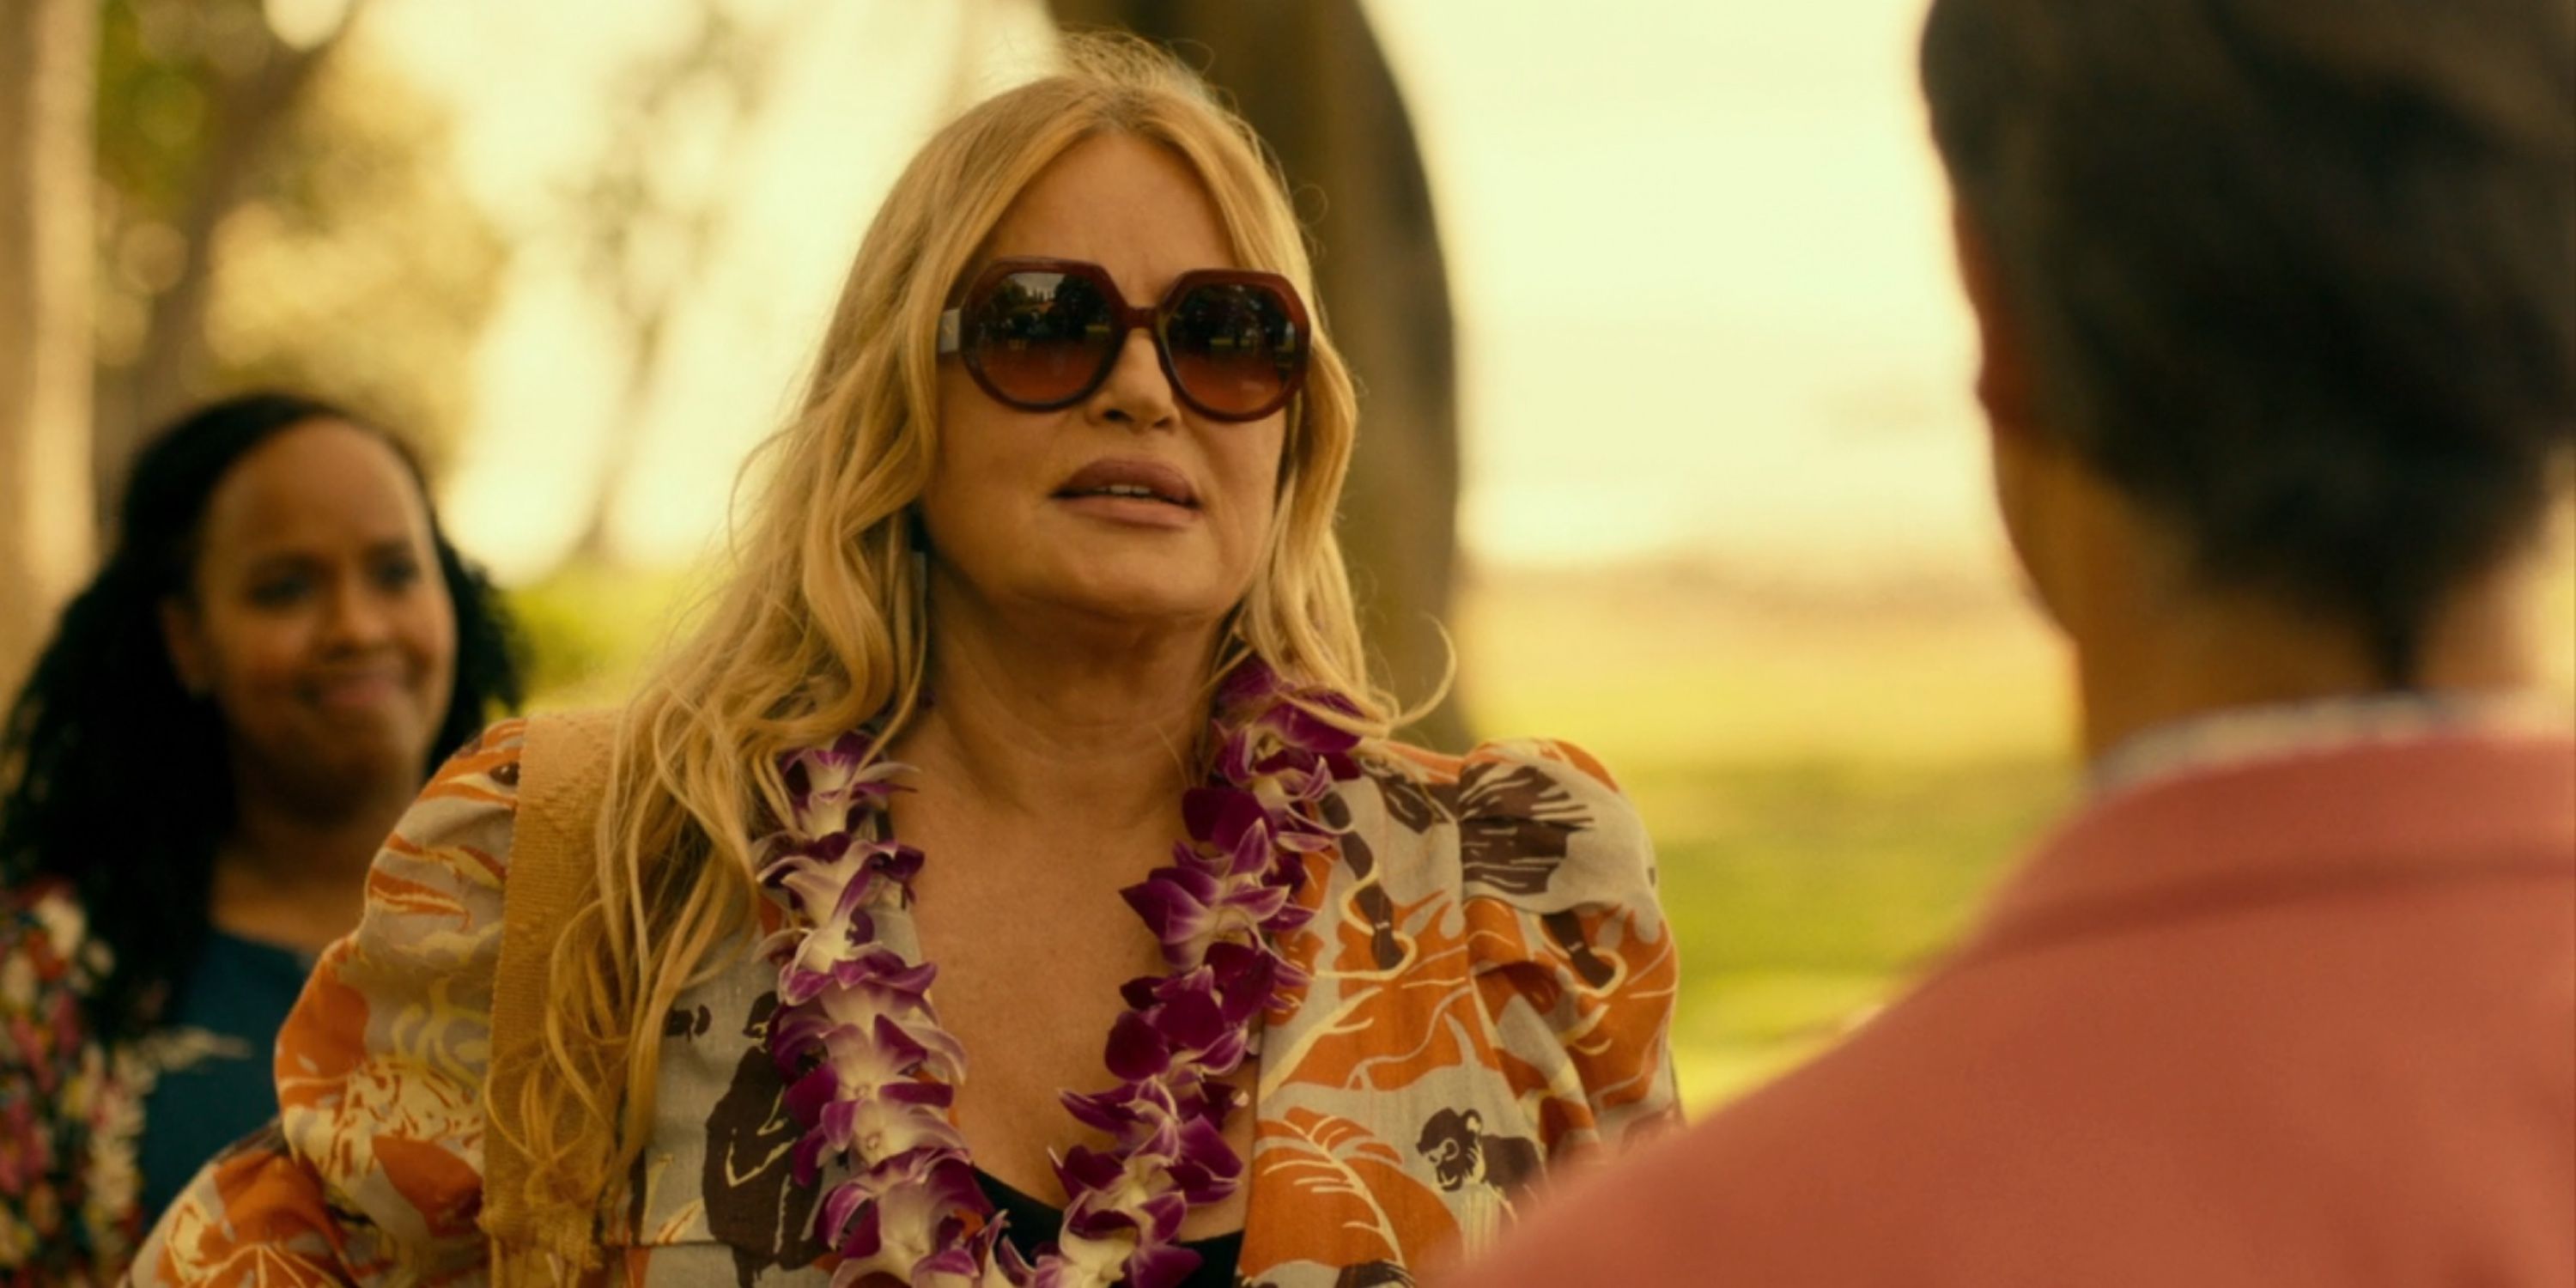 Jennifer Coolidge as Tanya McQuoid in The White Lotus on HBO Max